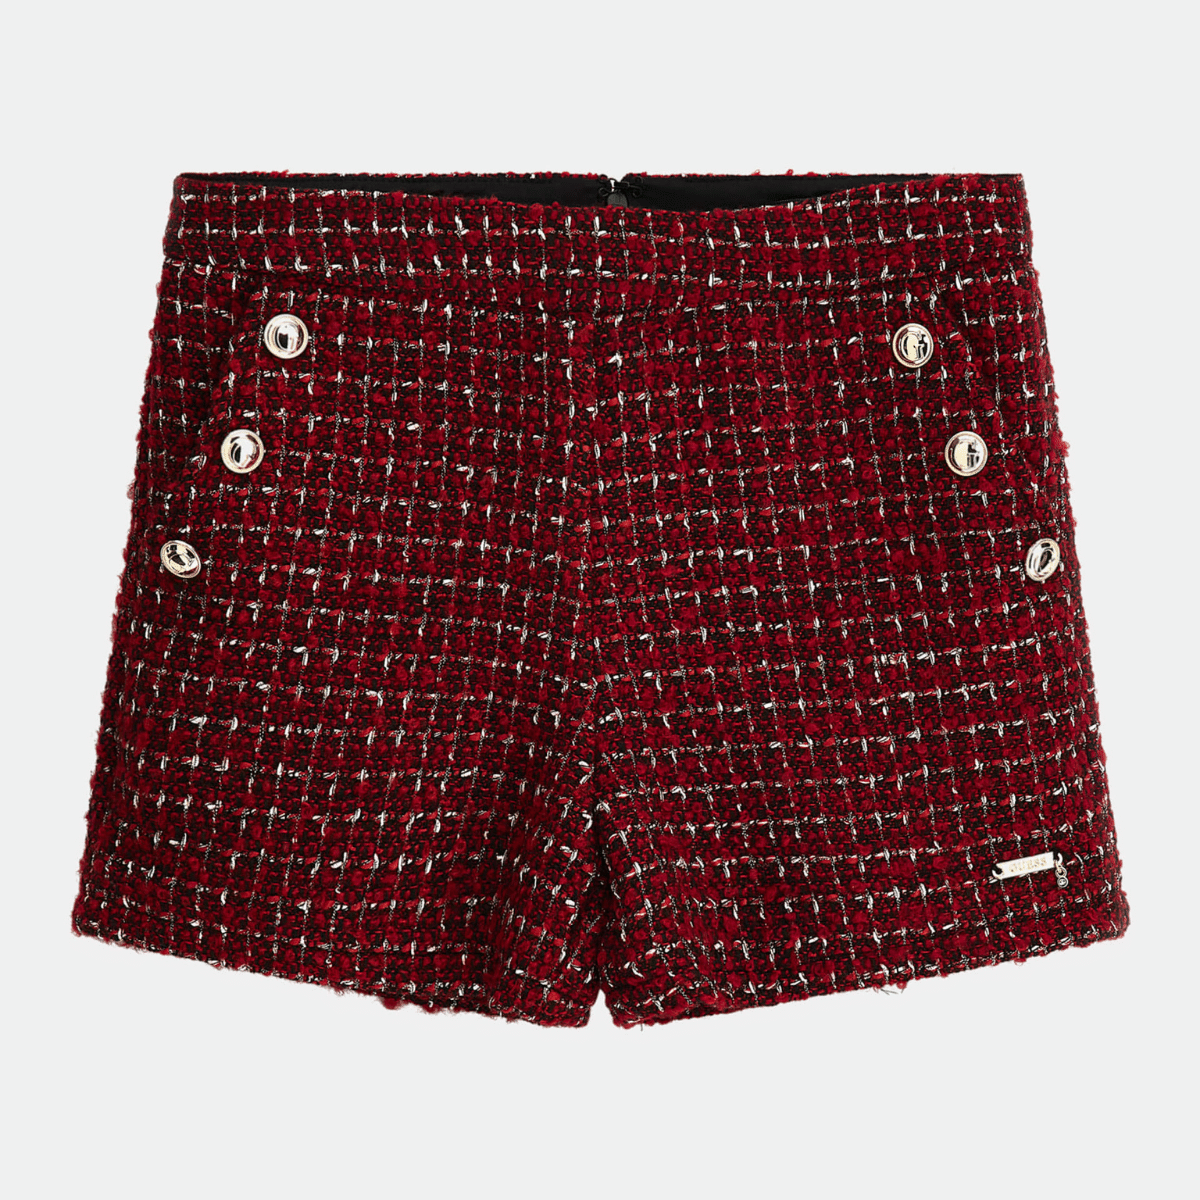 Guess girls red winter shorts with gold buttons